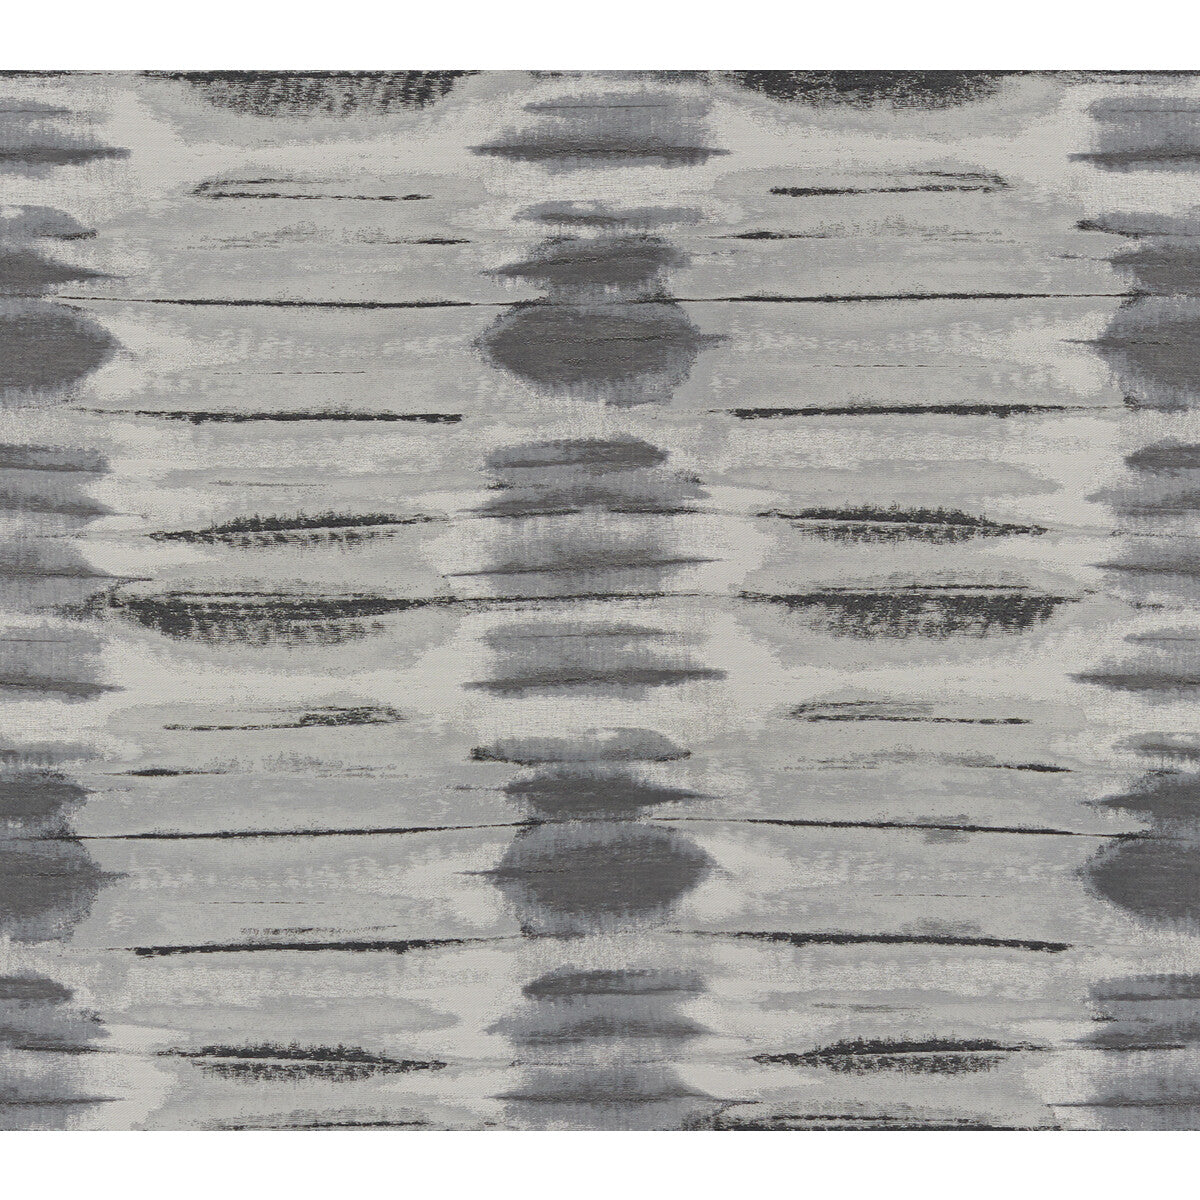 Tantino fabric in charcoal color - pattern 34596.11.0 - by Kravet Design